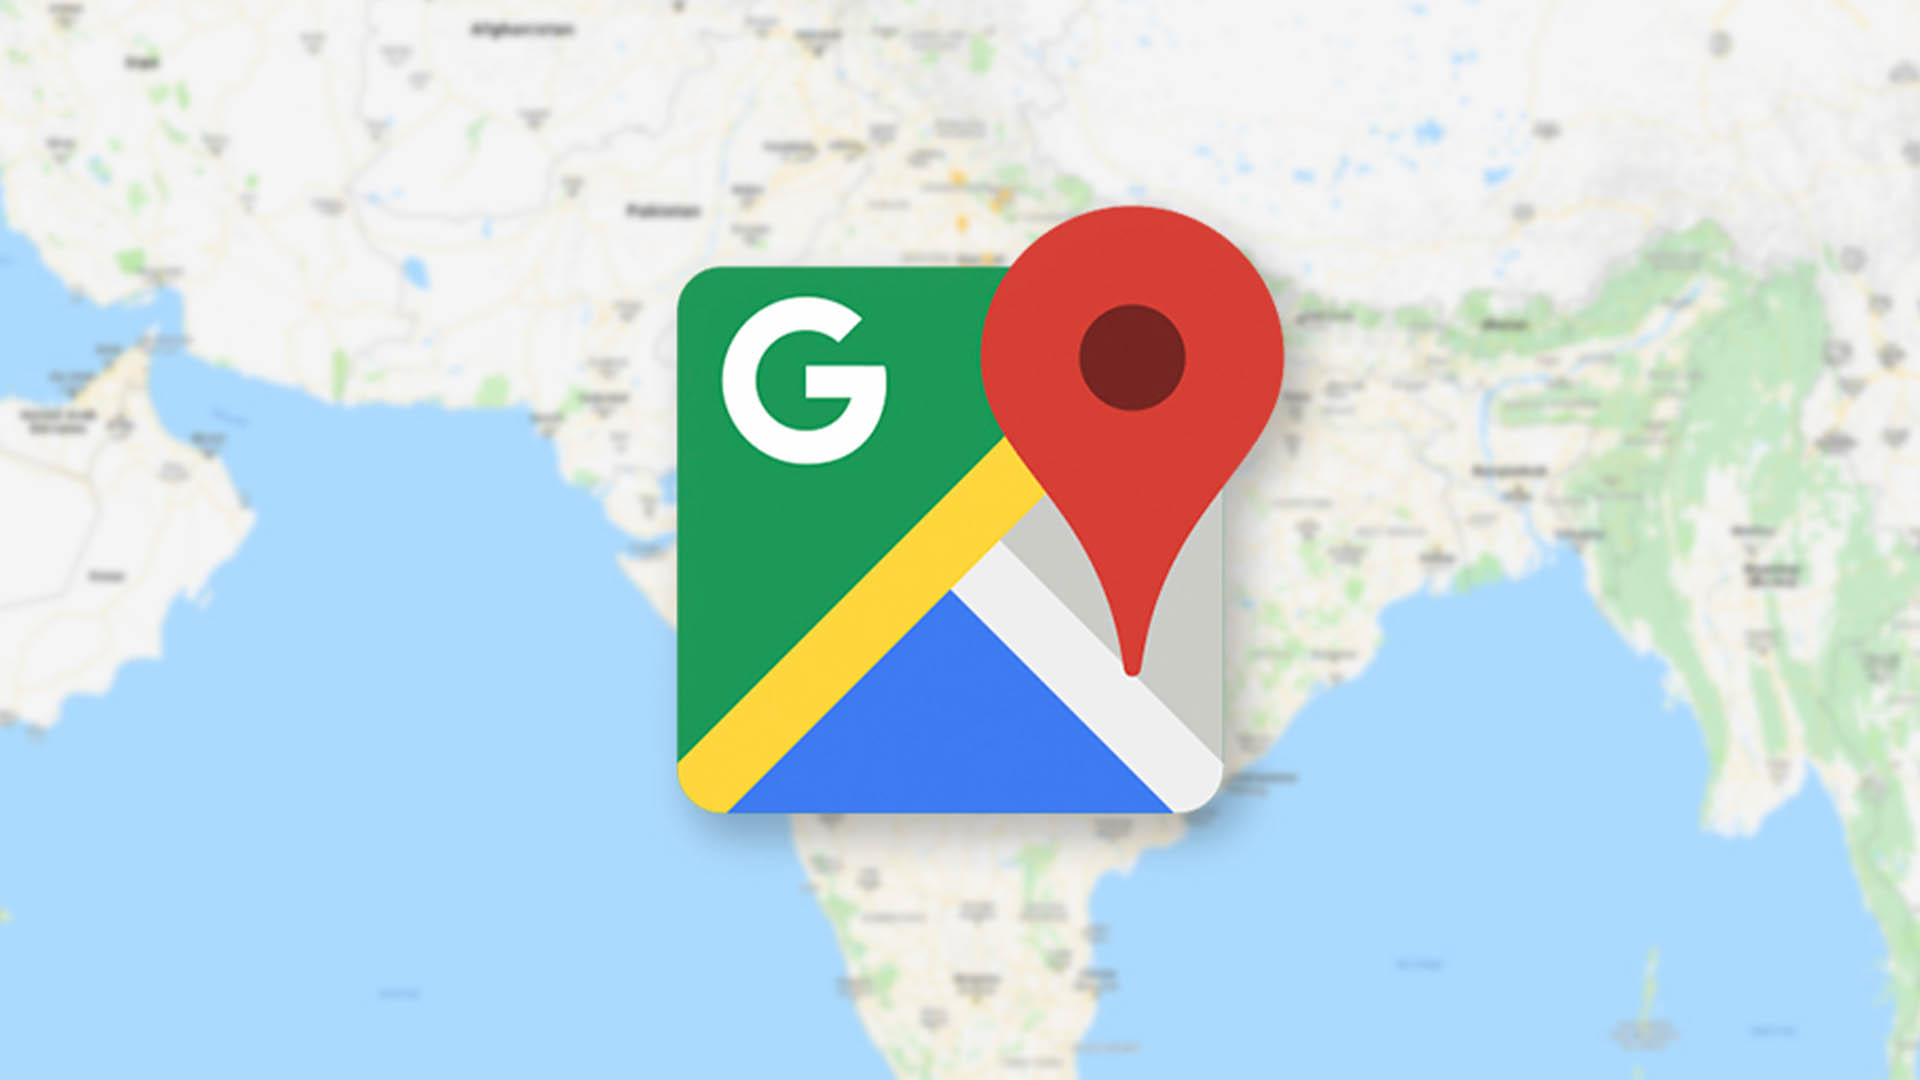 Google Maps is expected to support satellite connectivity in the future